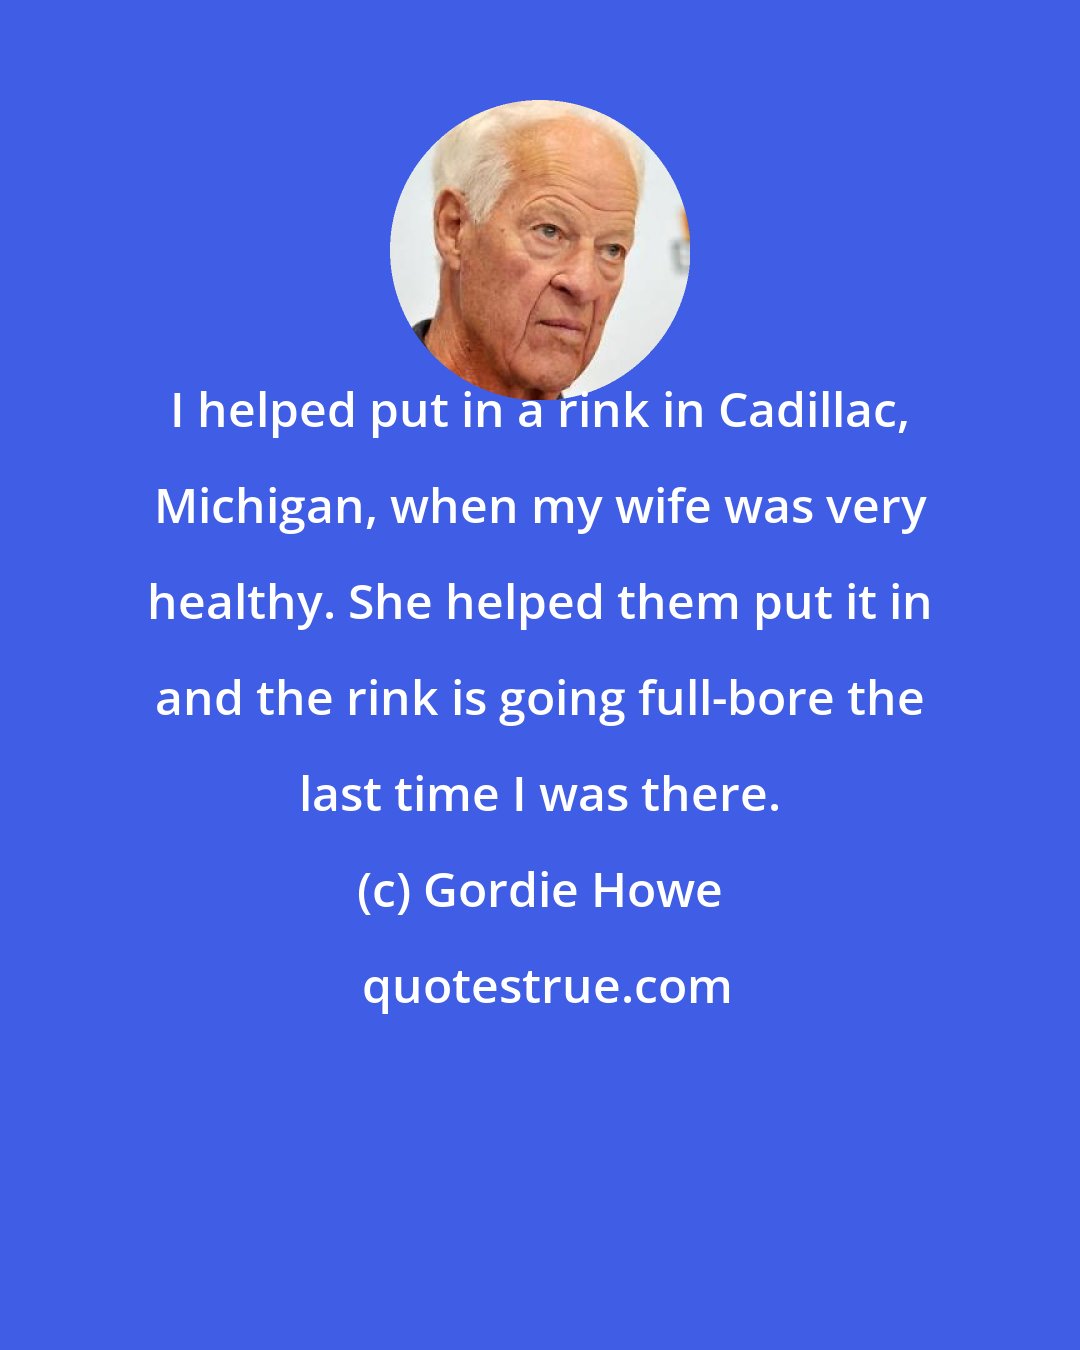 Gordie Howe: I helped put in a rink in Cadillac, Michigan, when my wife was very healthy. She helped them put it in and the rink is going full-bore the last time I was there.